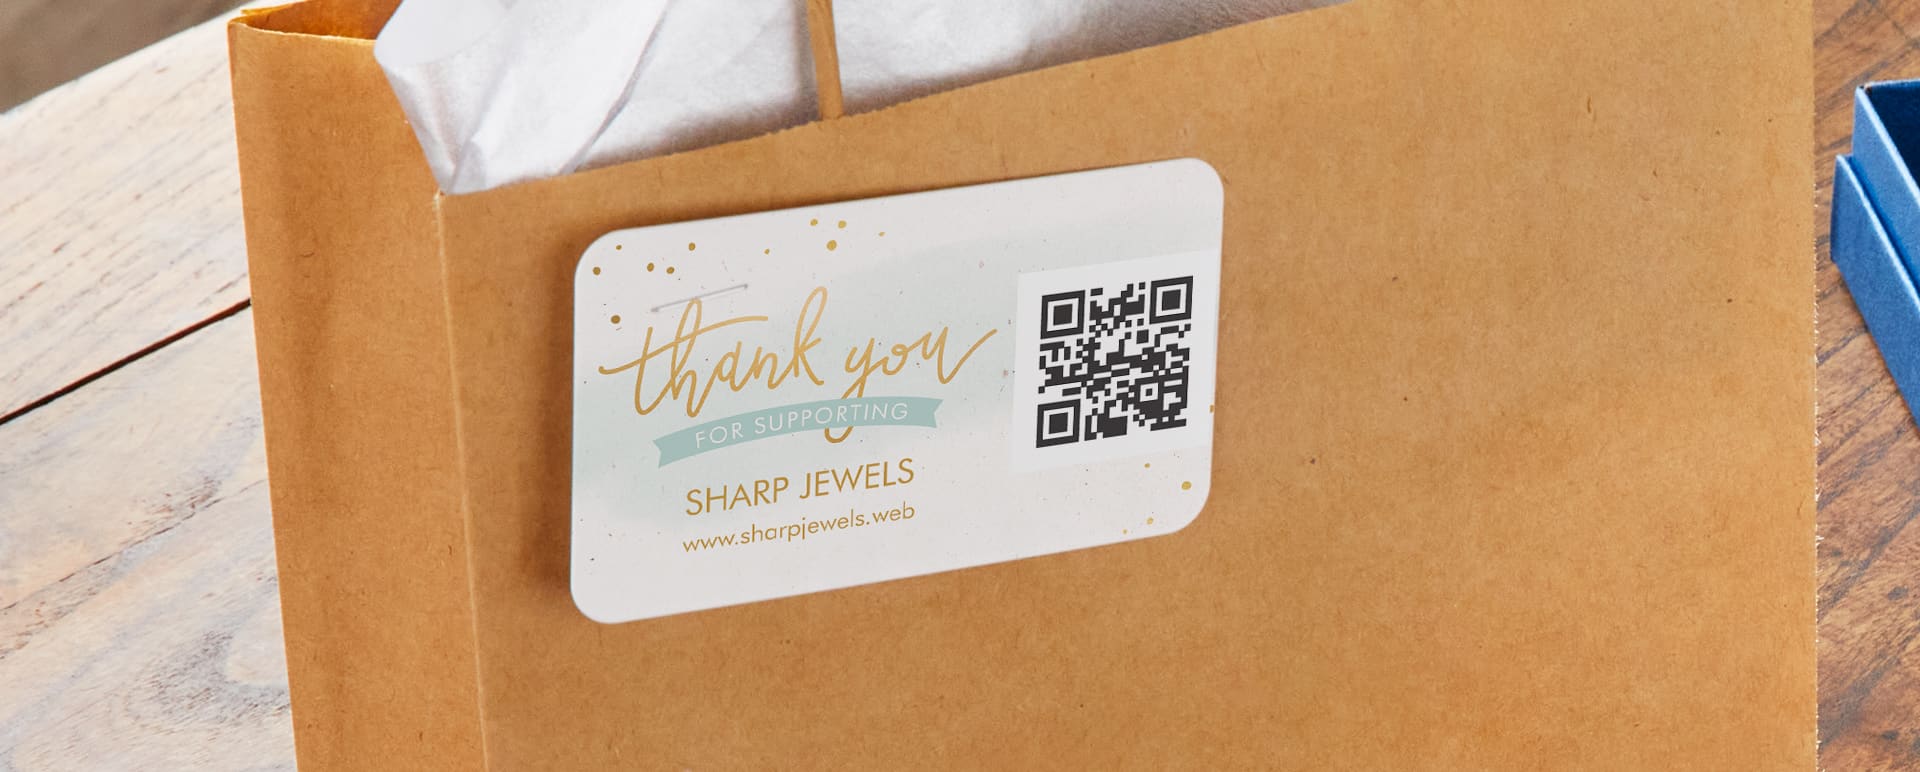 A custom QR code business card attached to a paper bag